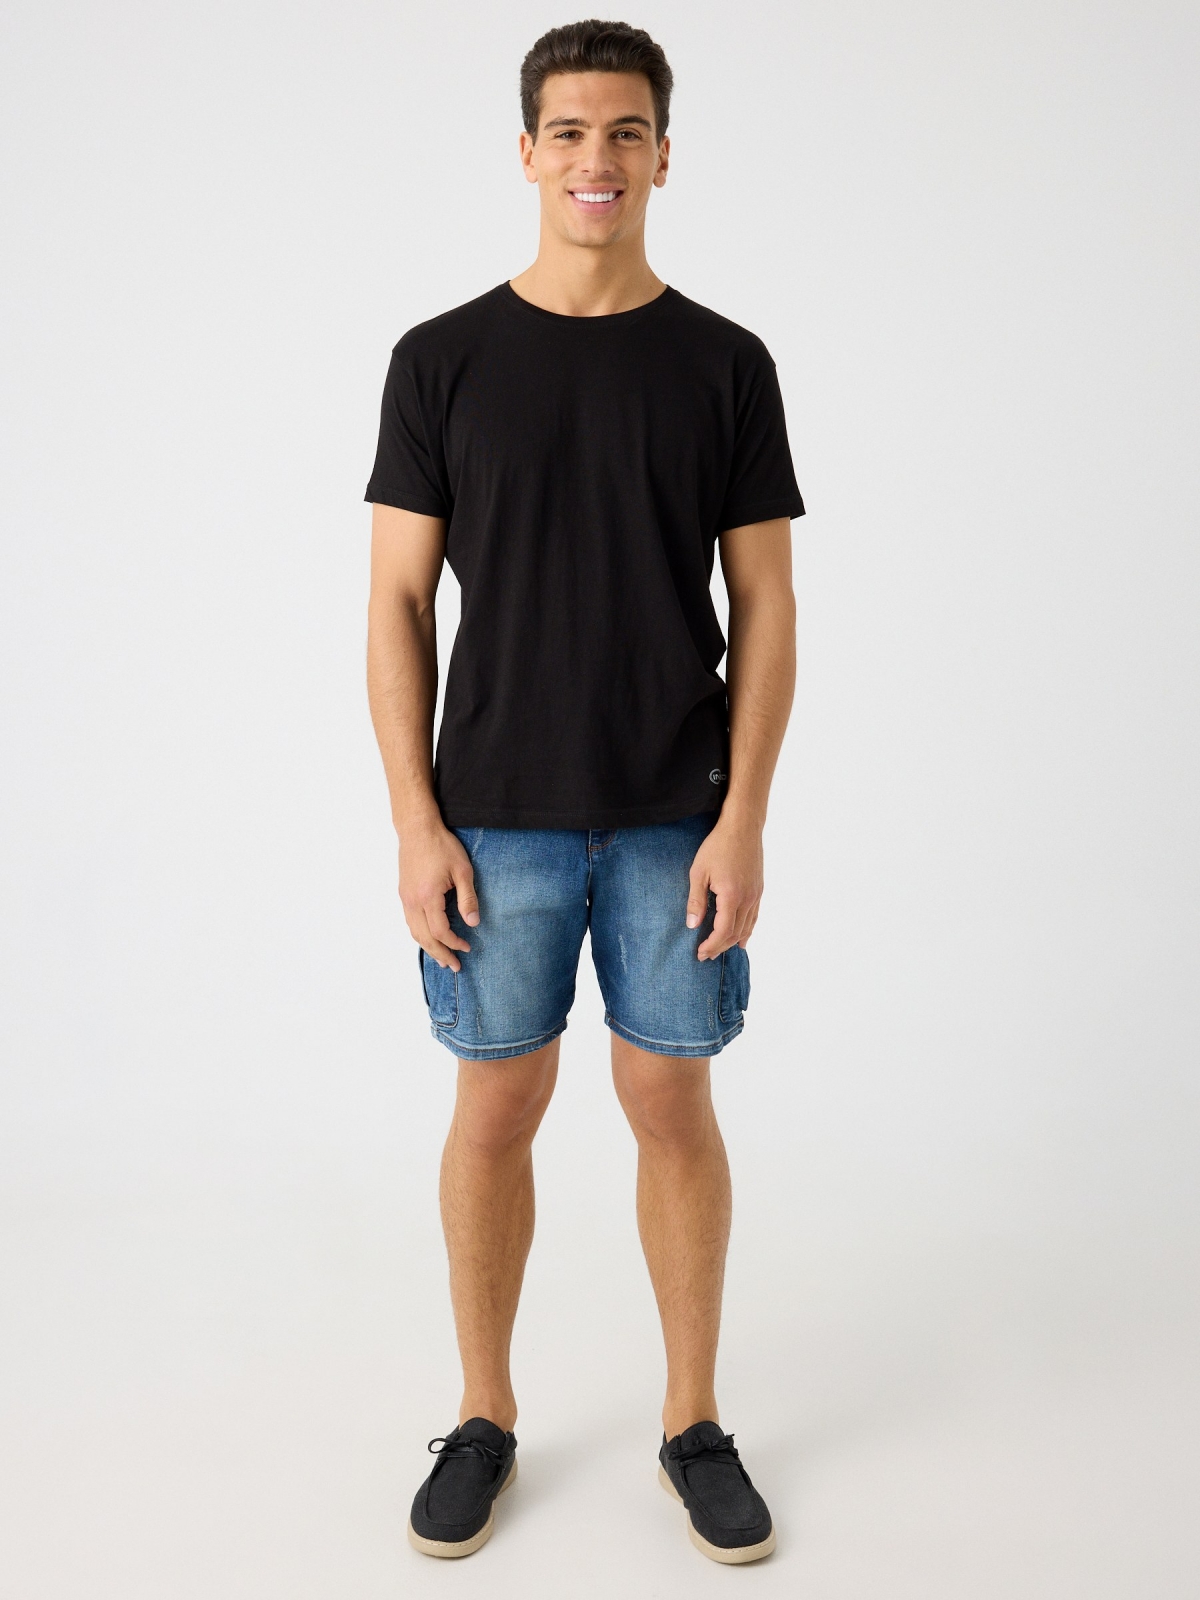 Distressed effect denim cargo shorts blue front view